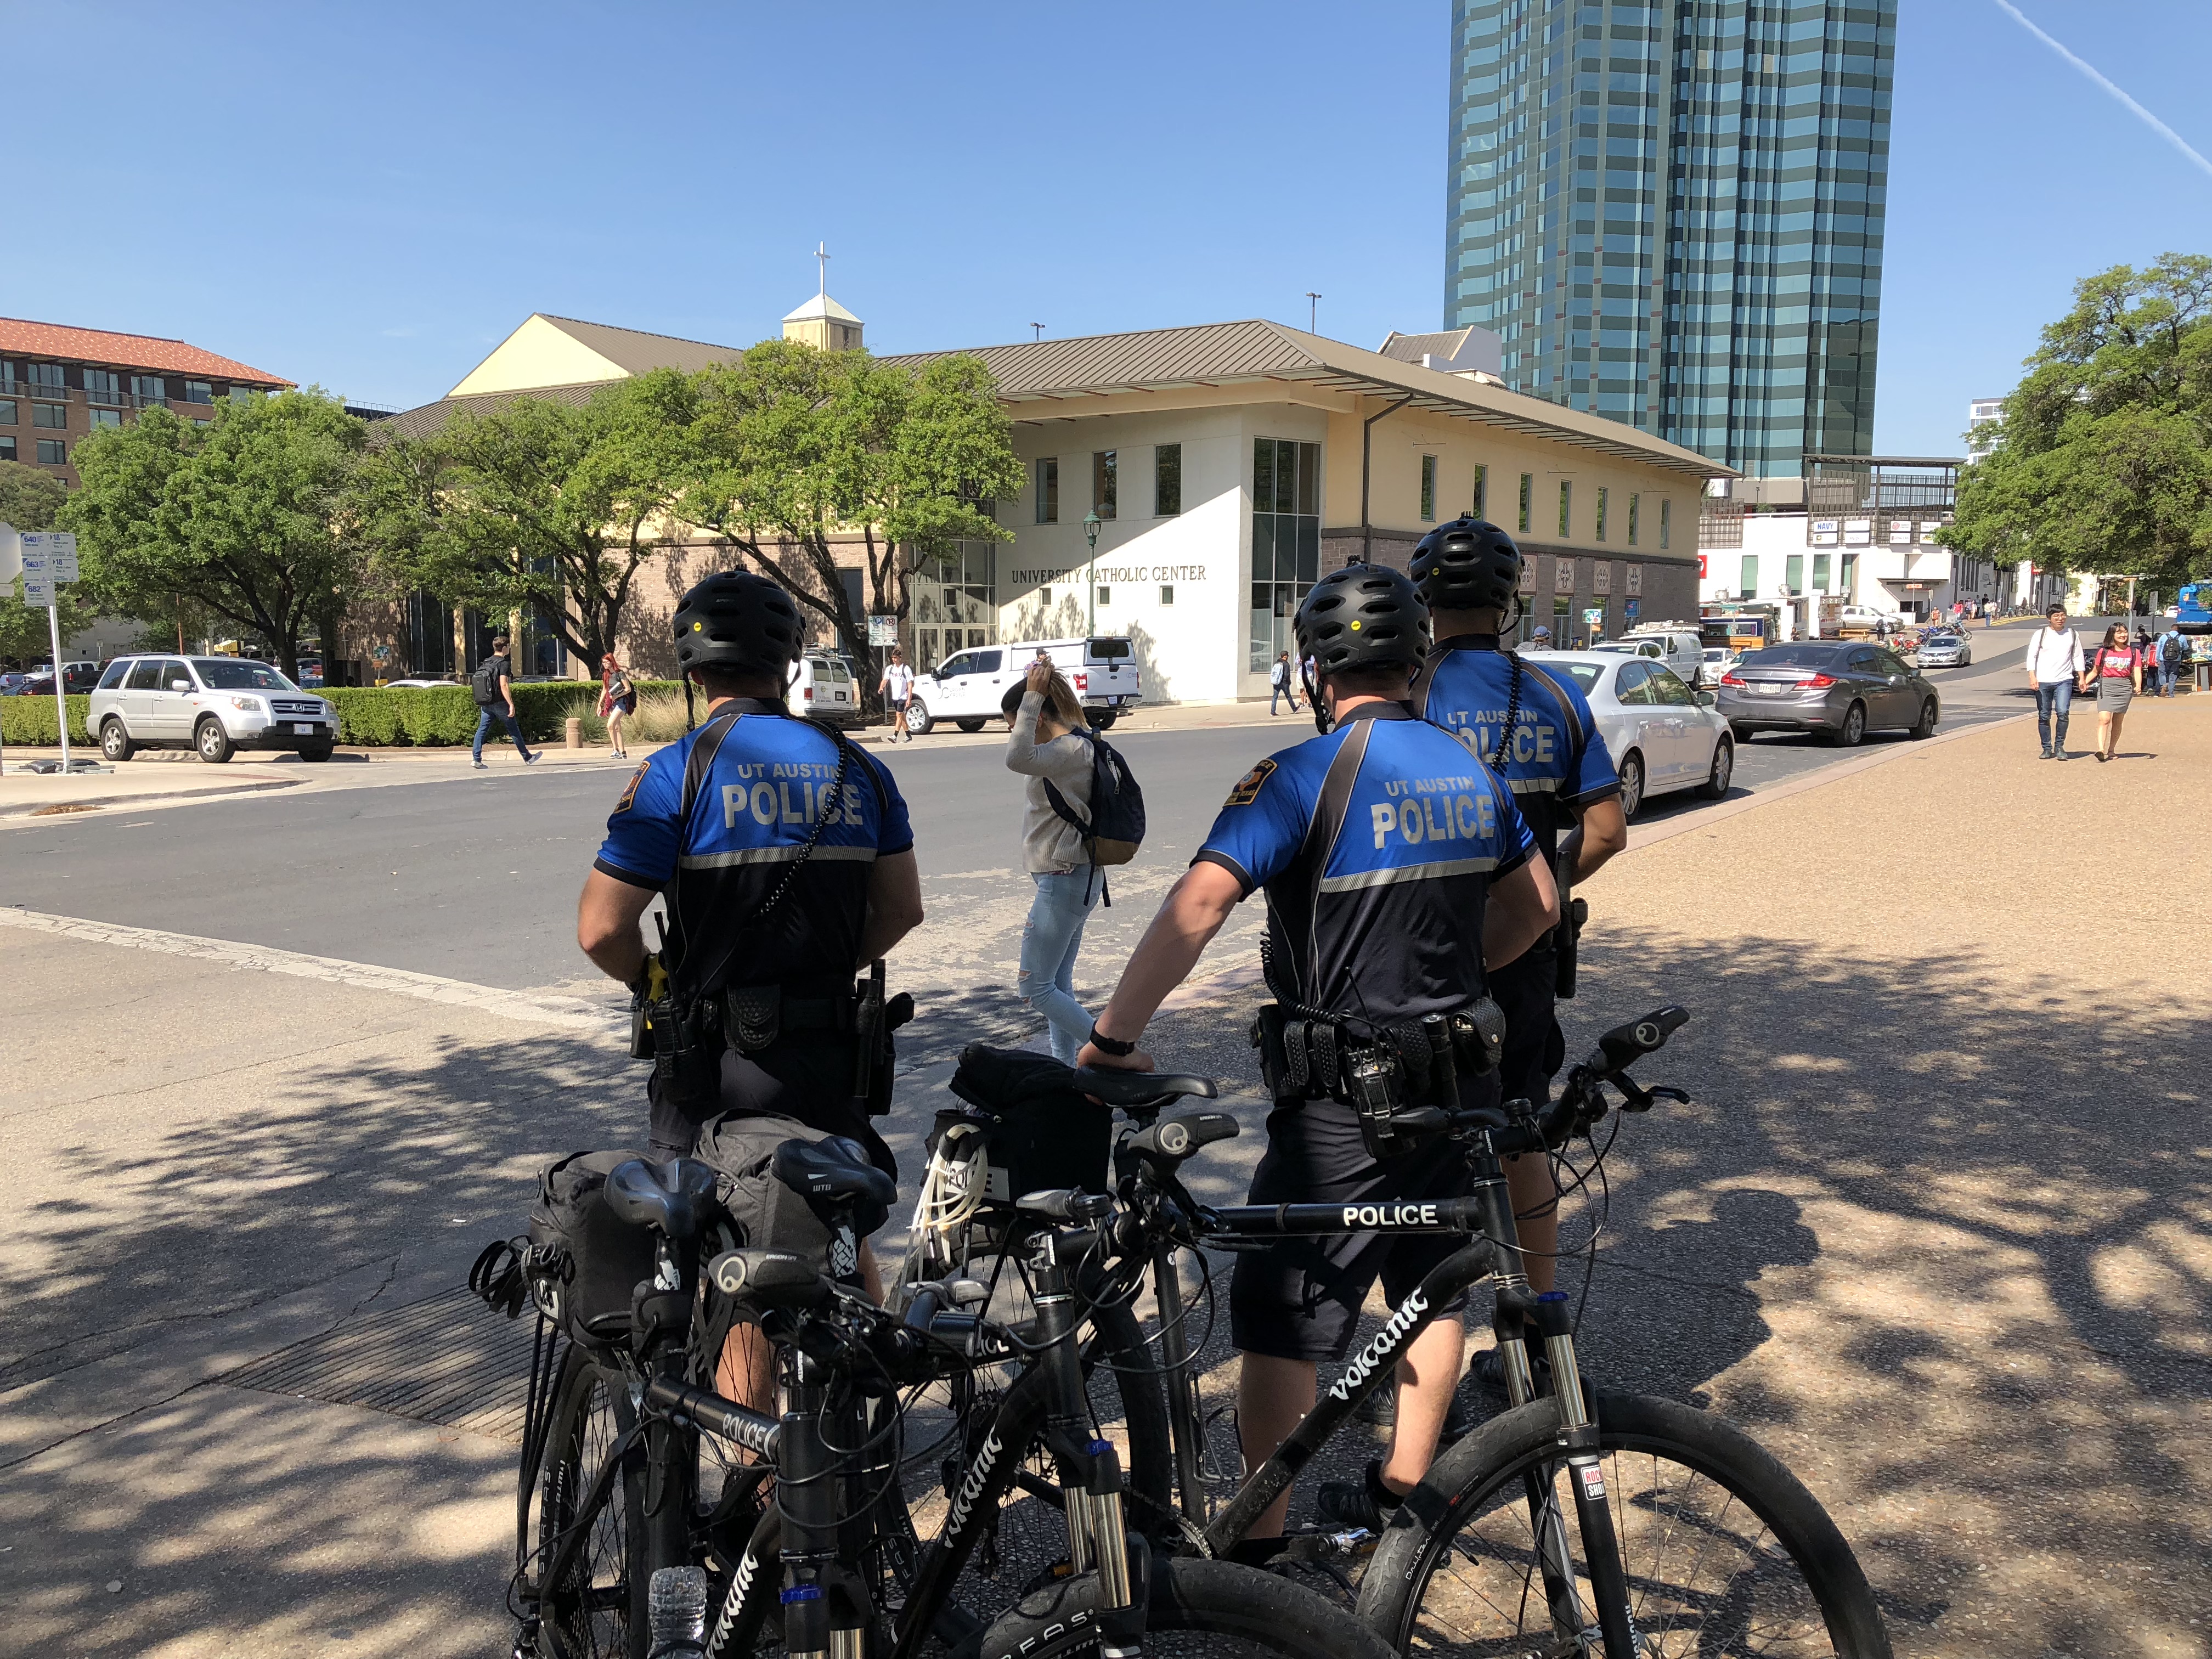 Bike officers watching traffic on campus